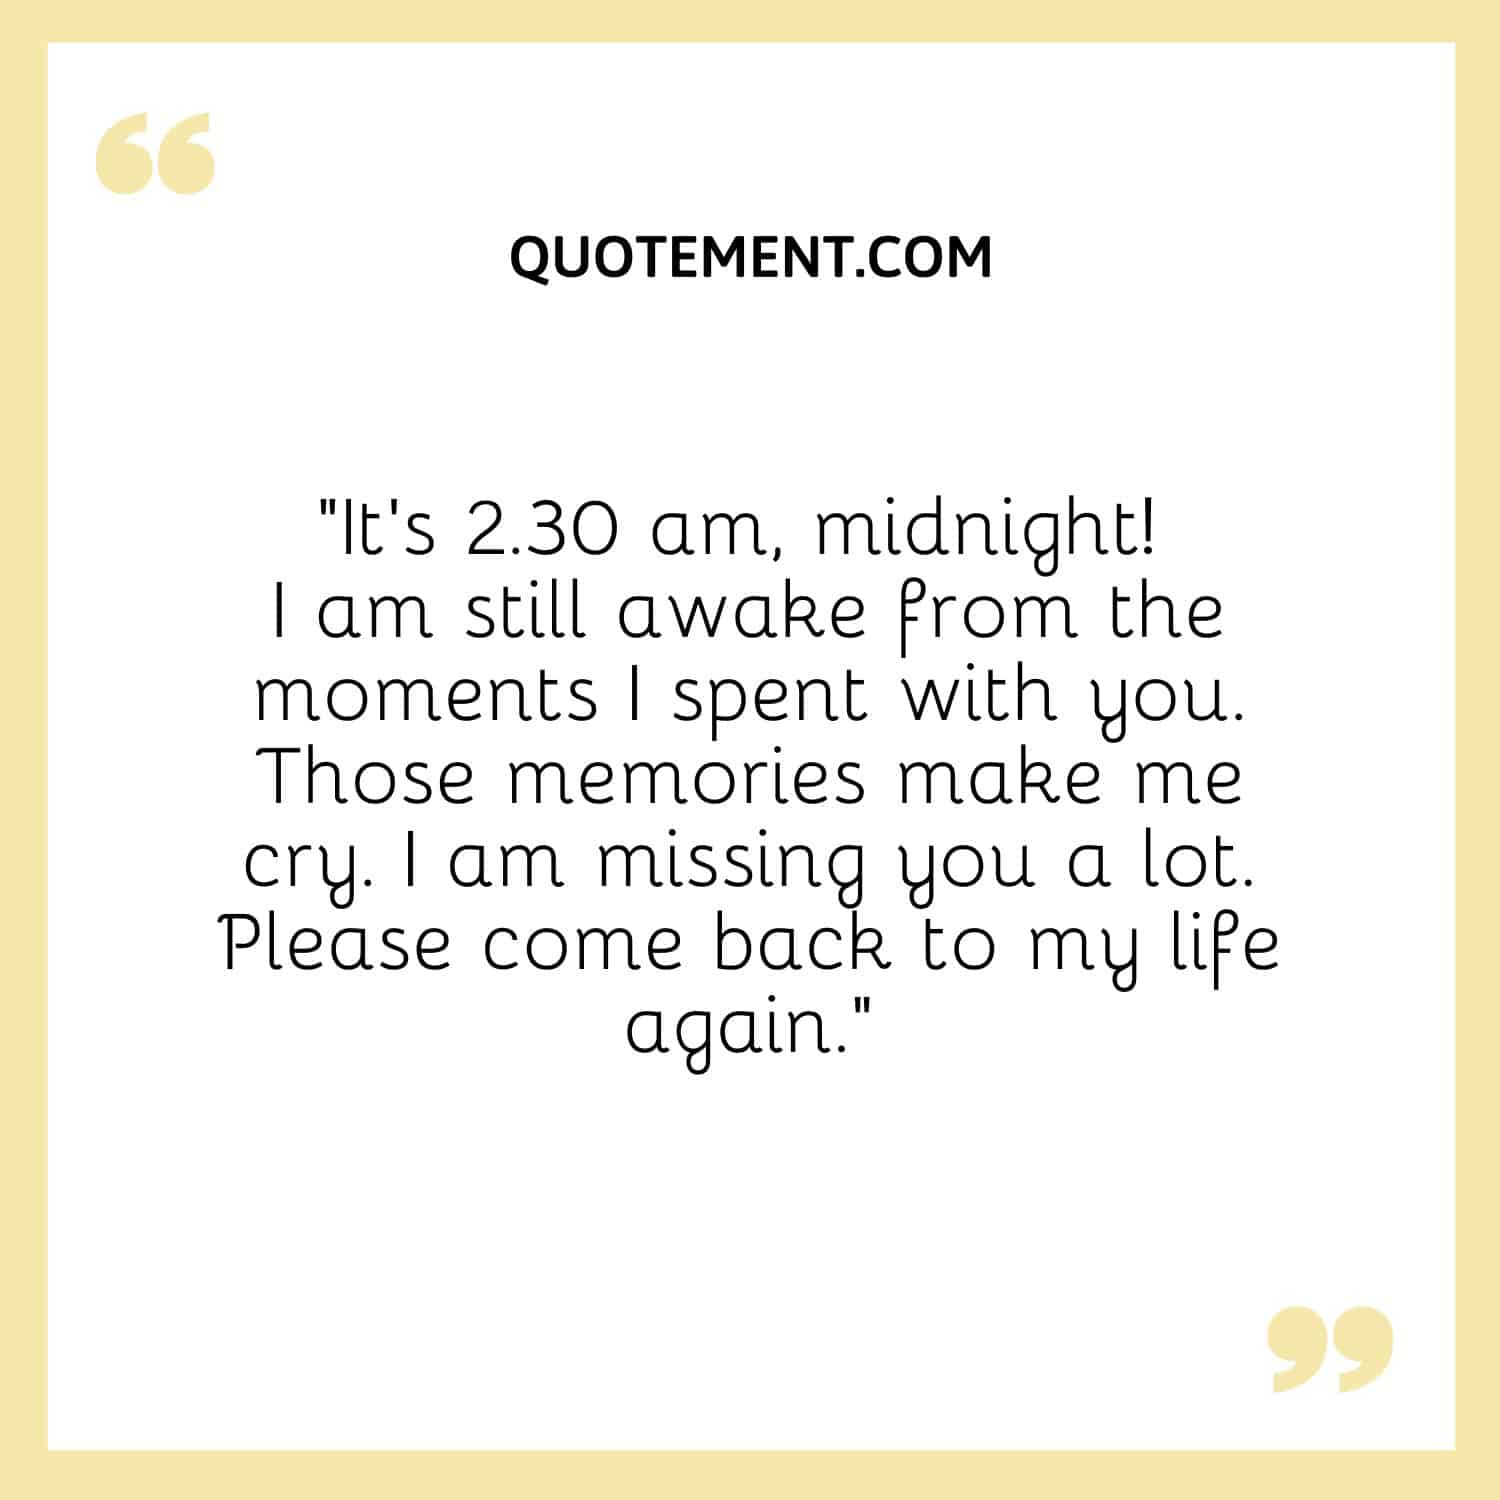 It’s 2.30 am, midnight! I am still awake from the moments I spent with you